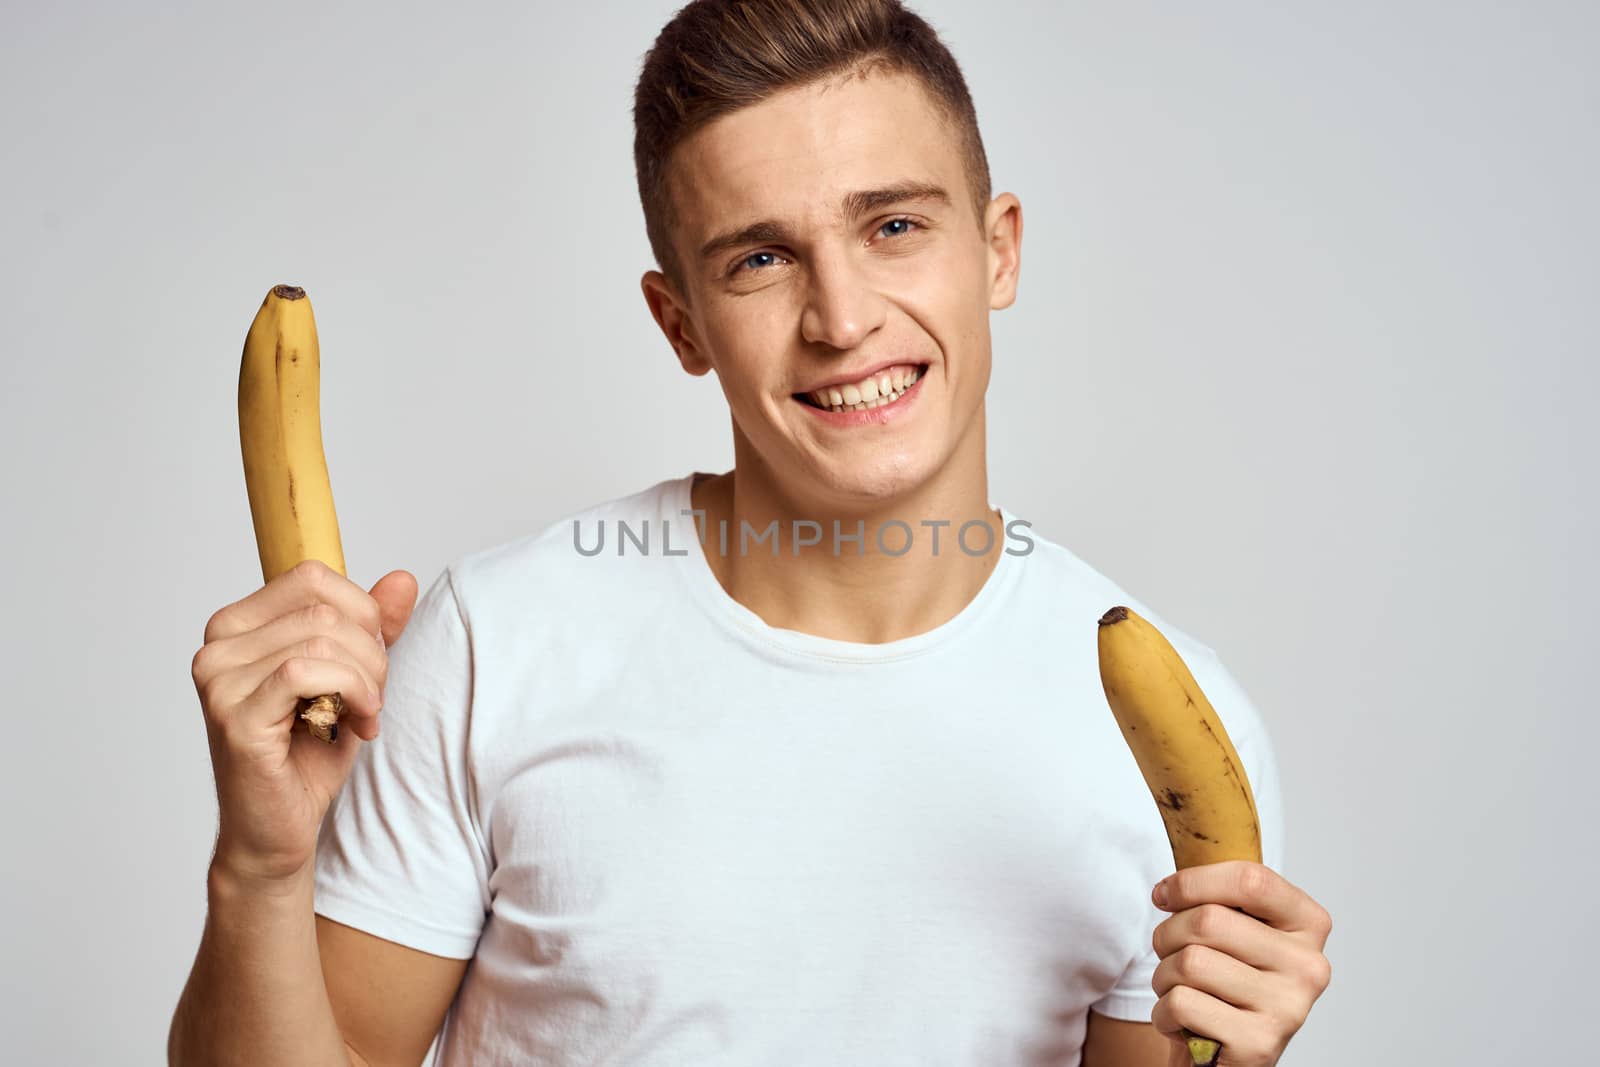 guy with a banana in his hand on a light background fun emotions light background white t-shirt model by SHOTPRIME